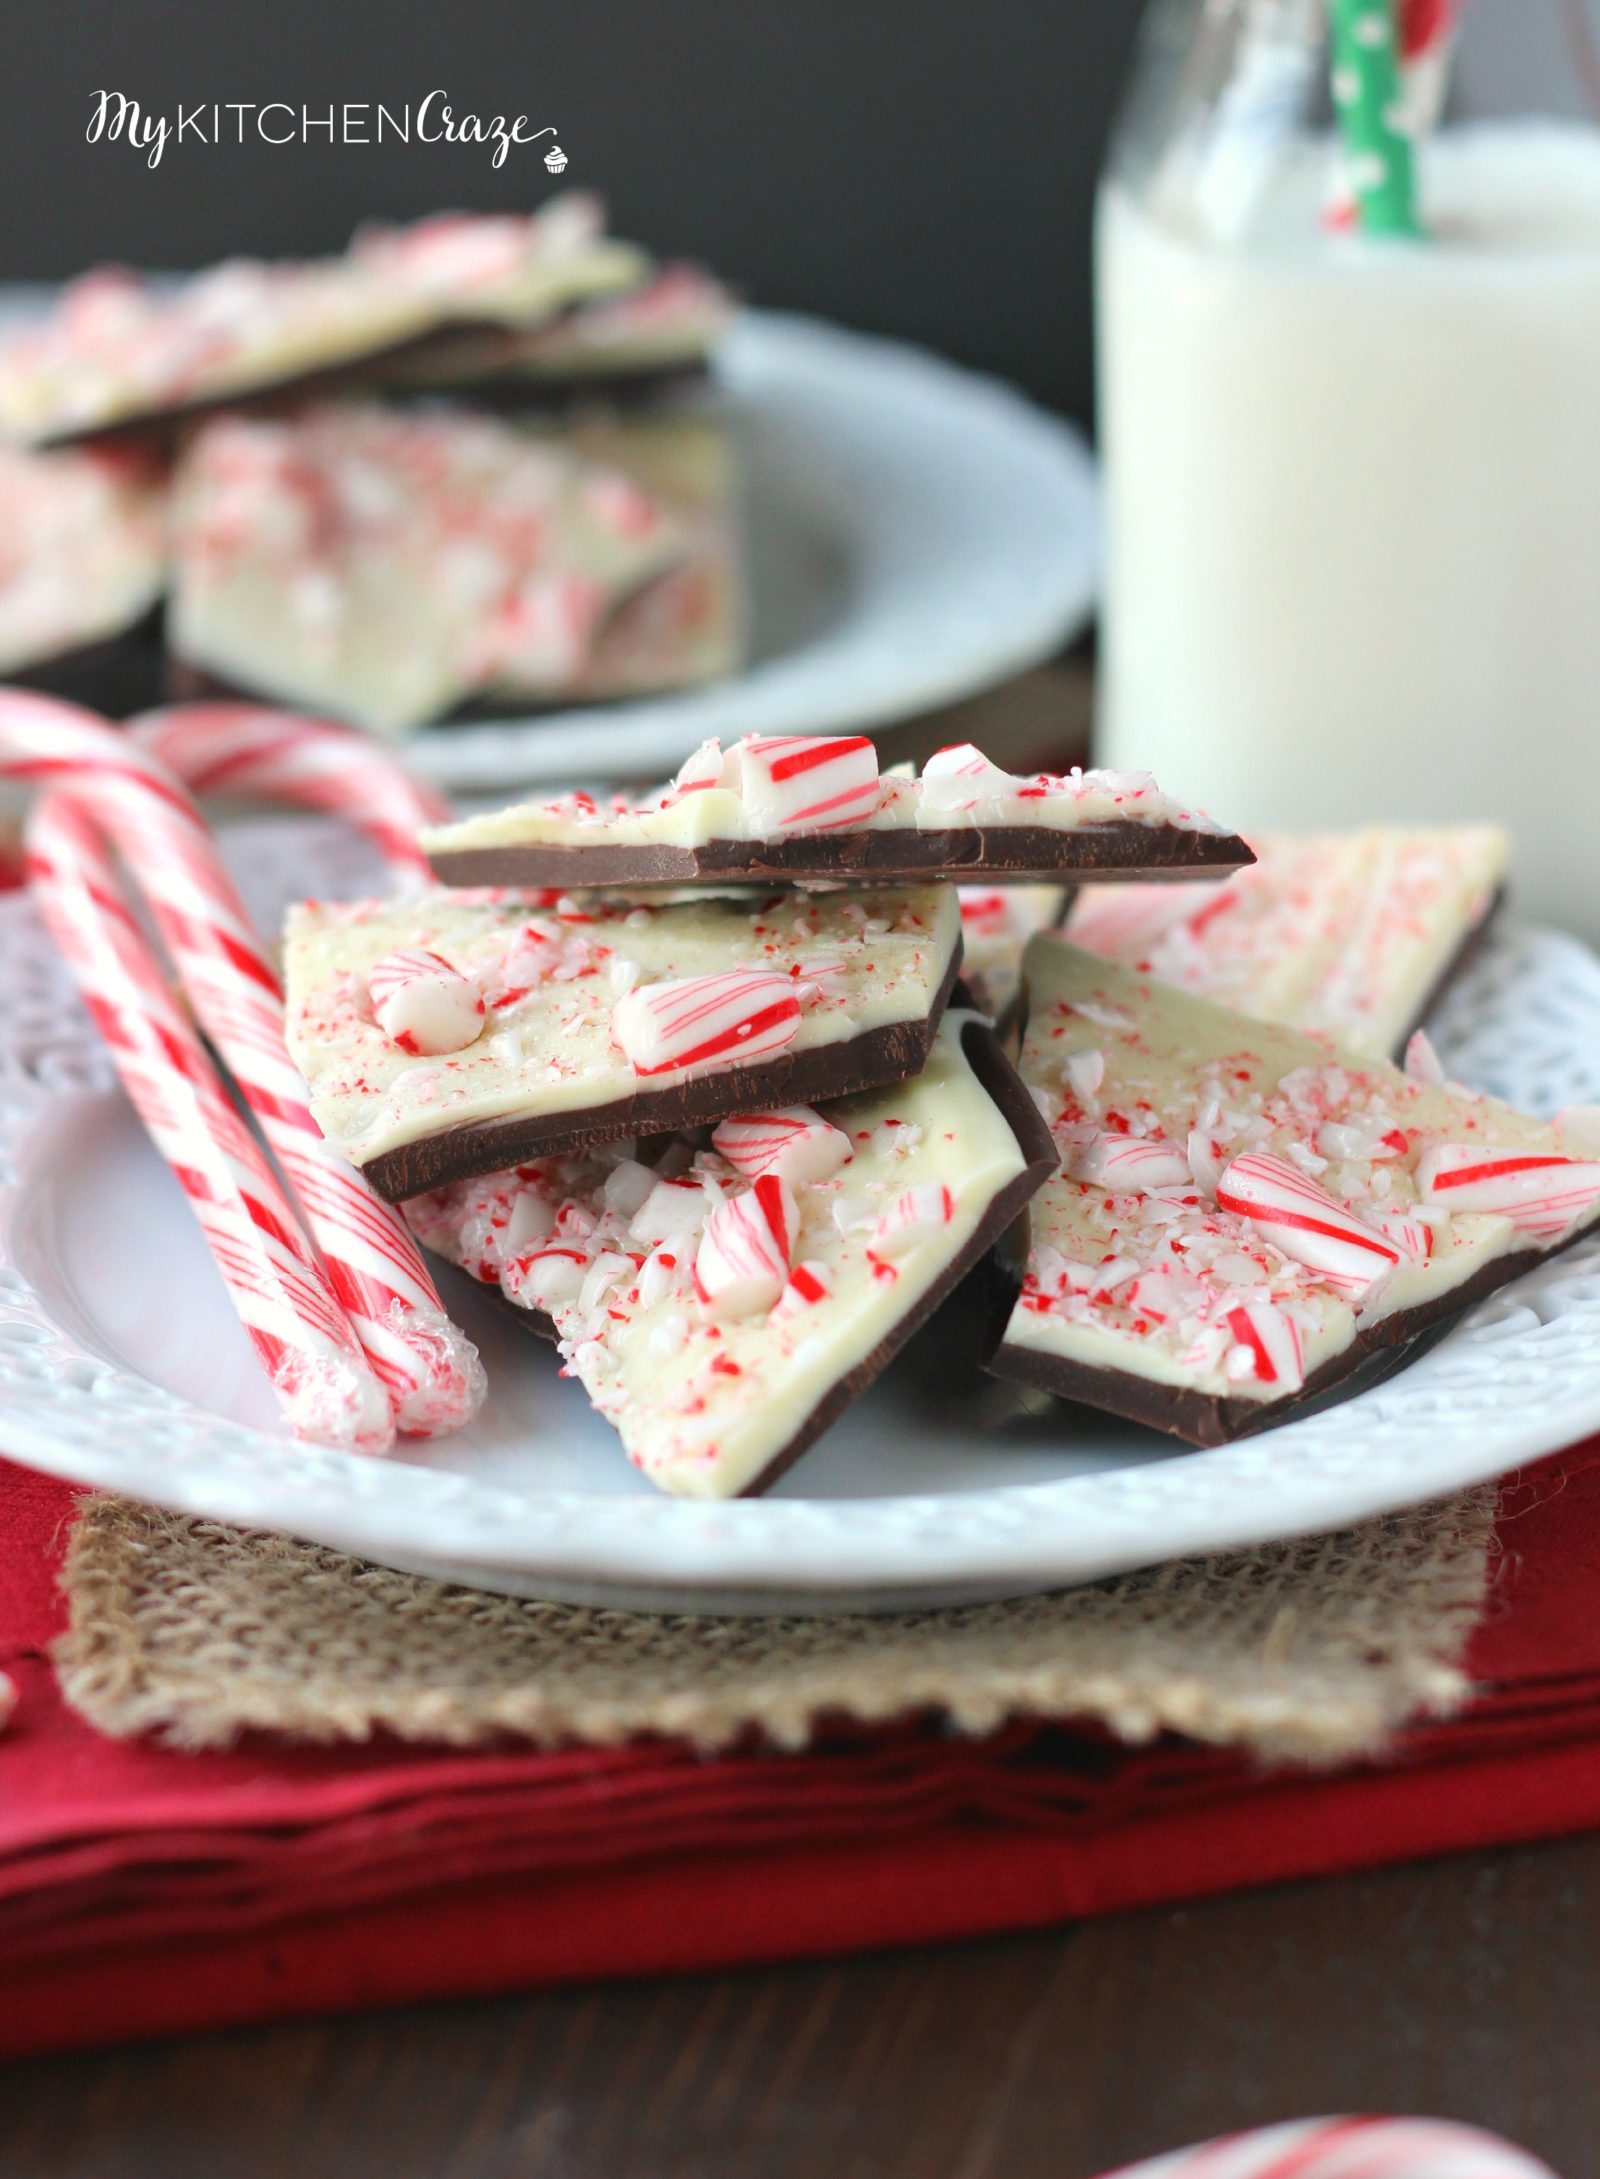 Easy Peppermint Bark ~ mykitchencraze.com ~ Perfect dessert for the holidays.